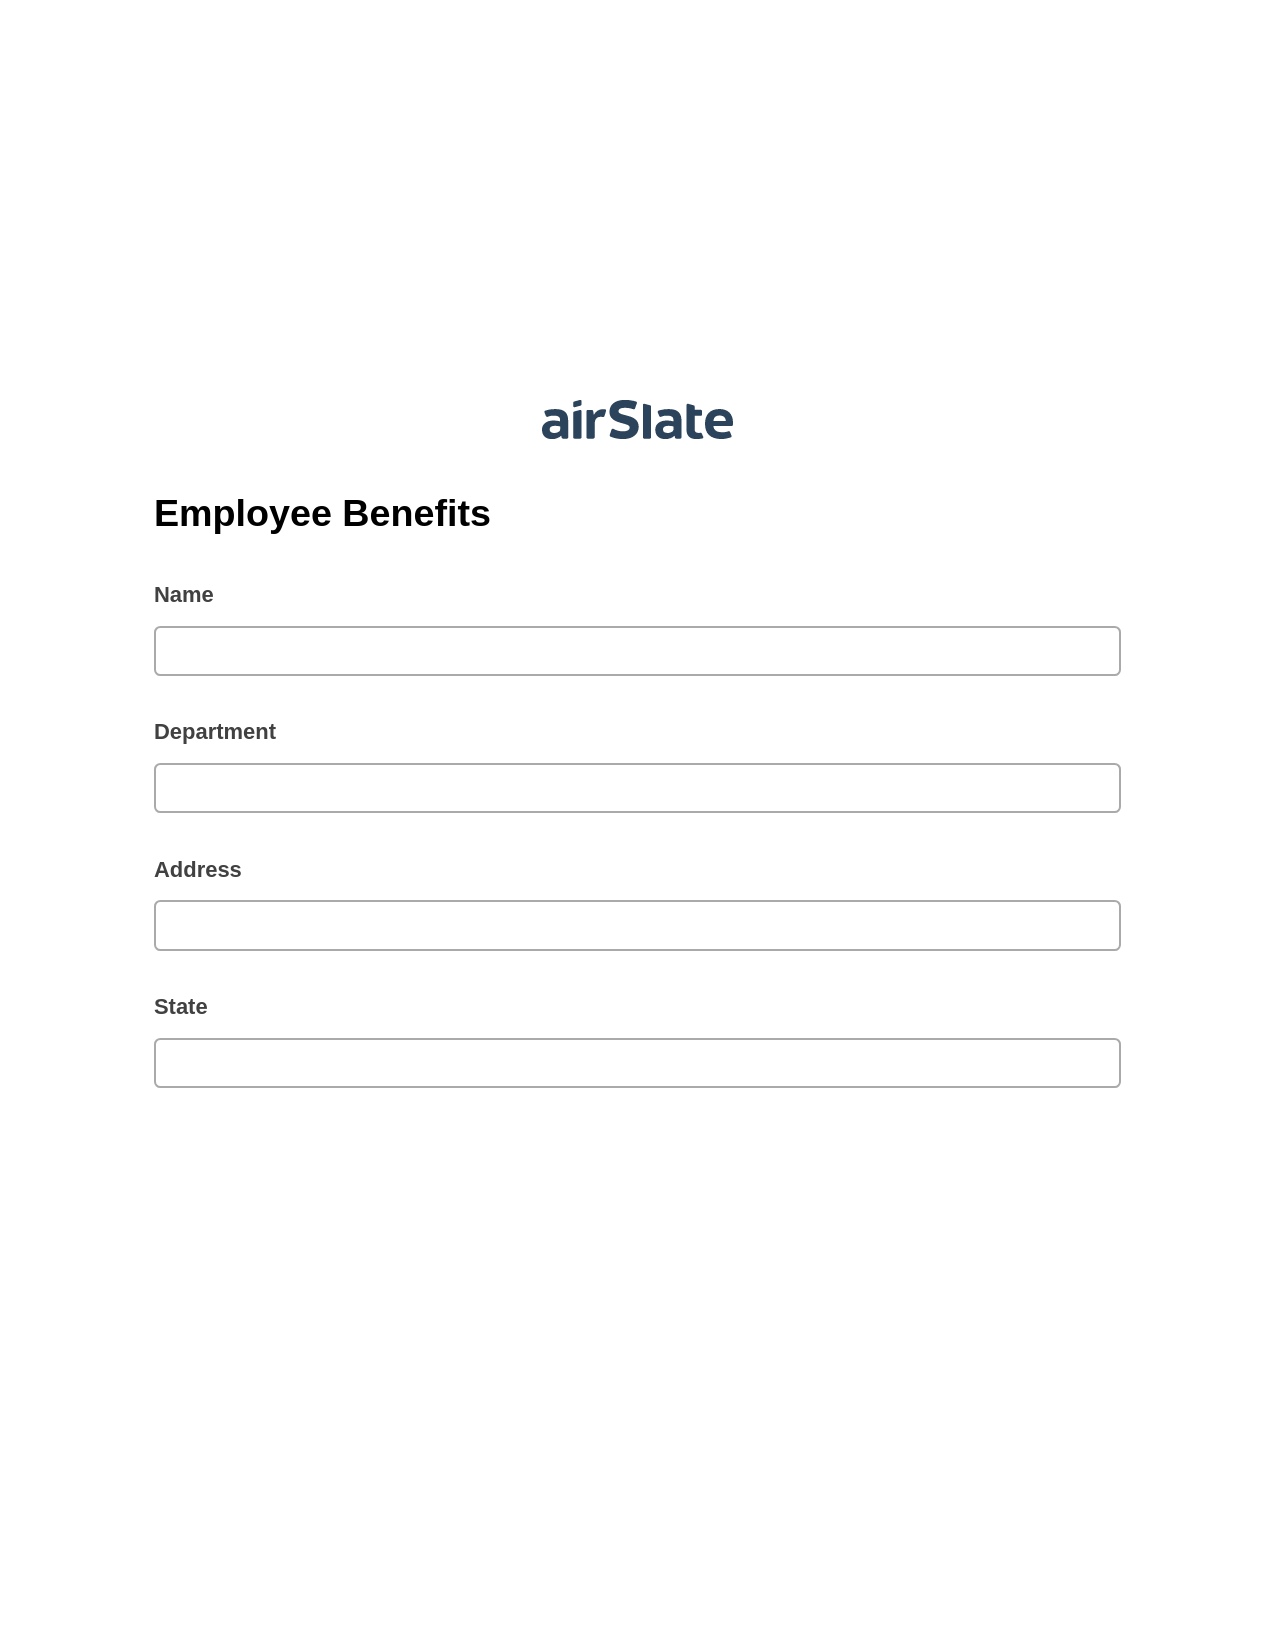 Employee Benefits Pre-fill from Salesforce Record Bot, Mailchimp add recipient to audience Bot, Export to Excel 365 Bot